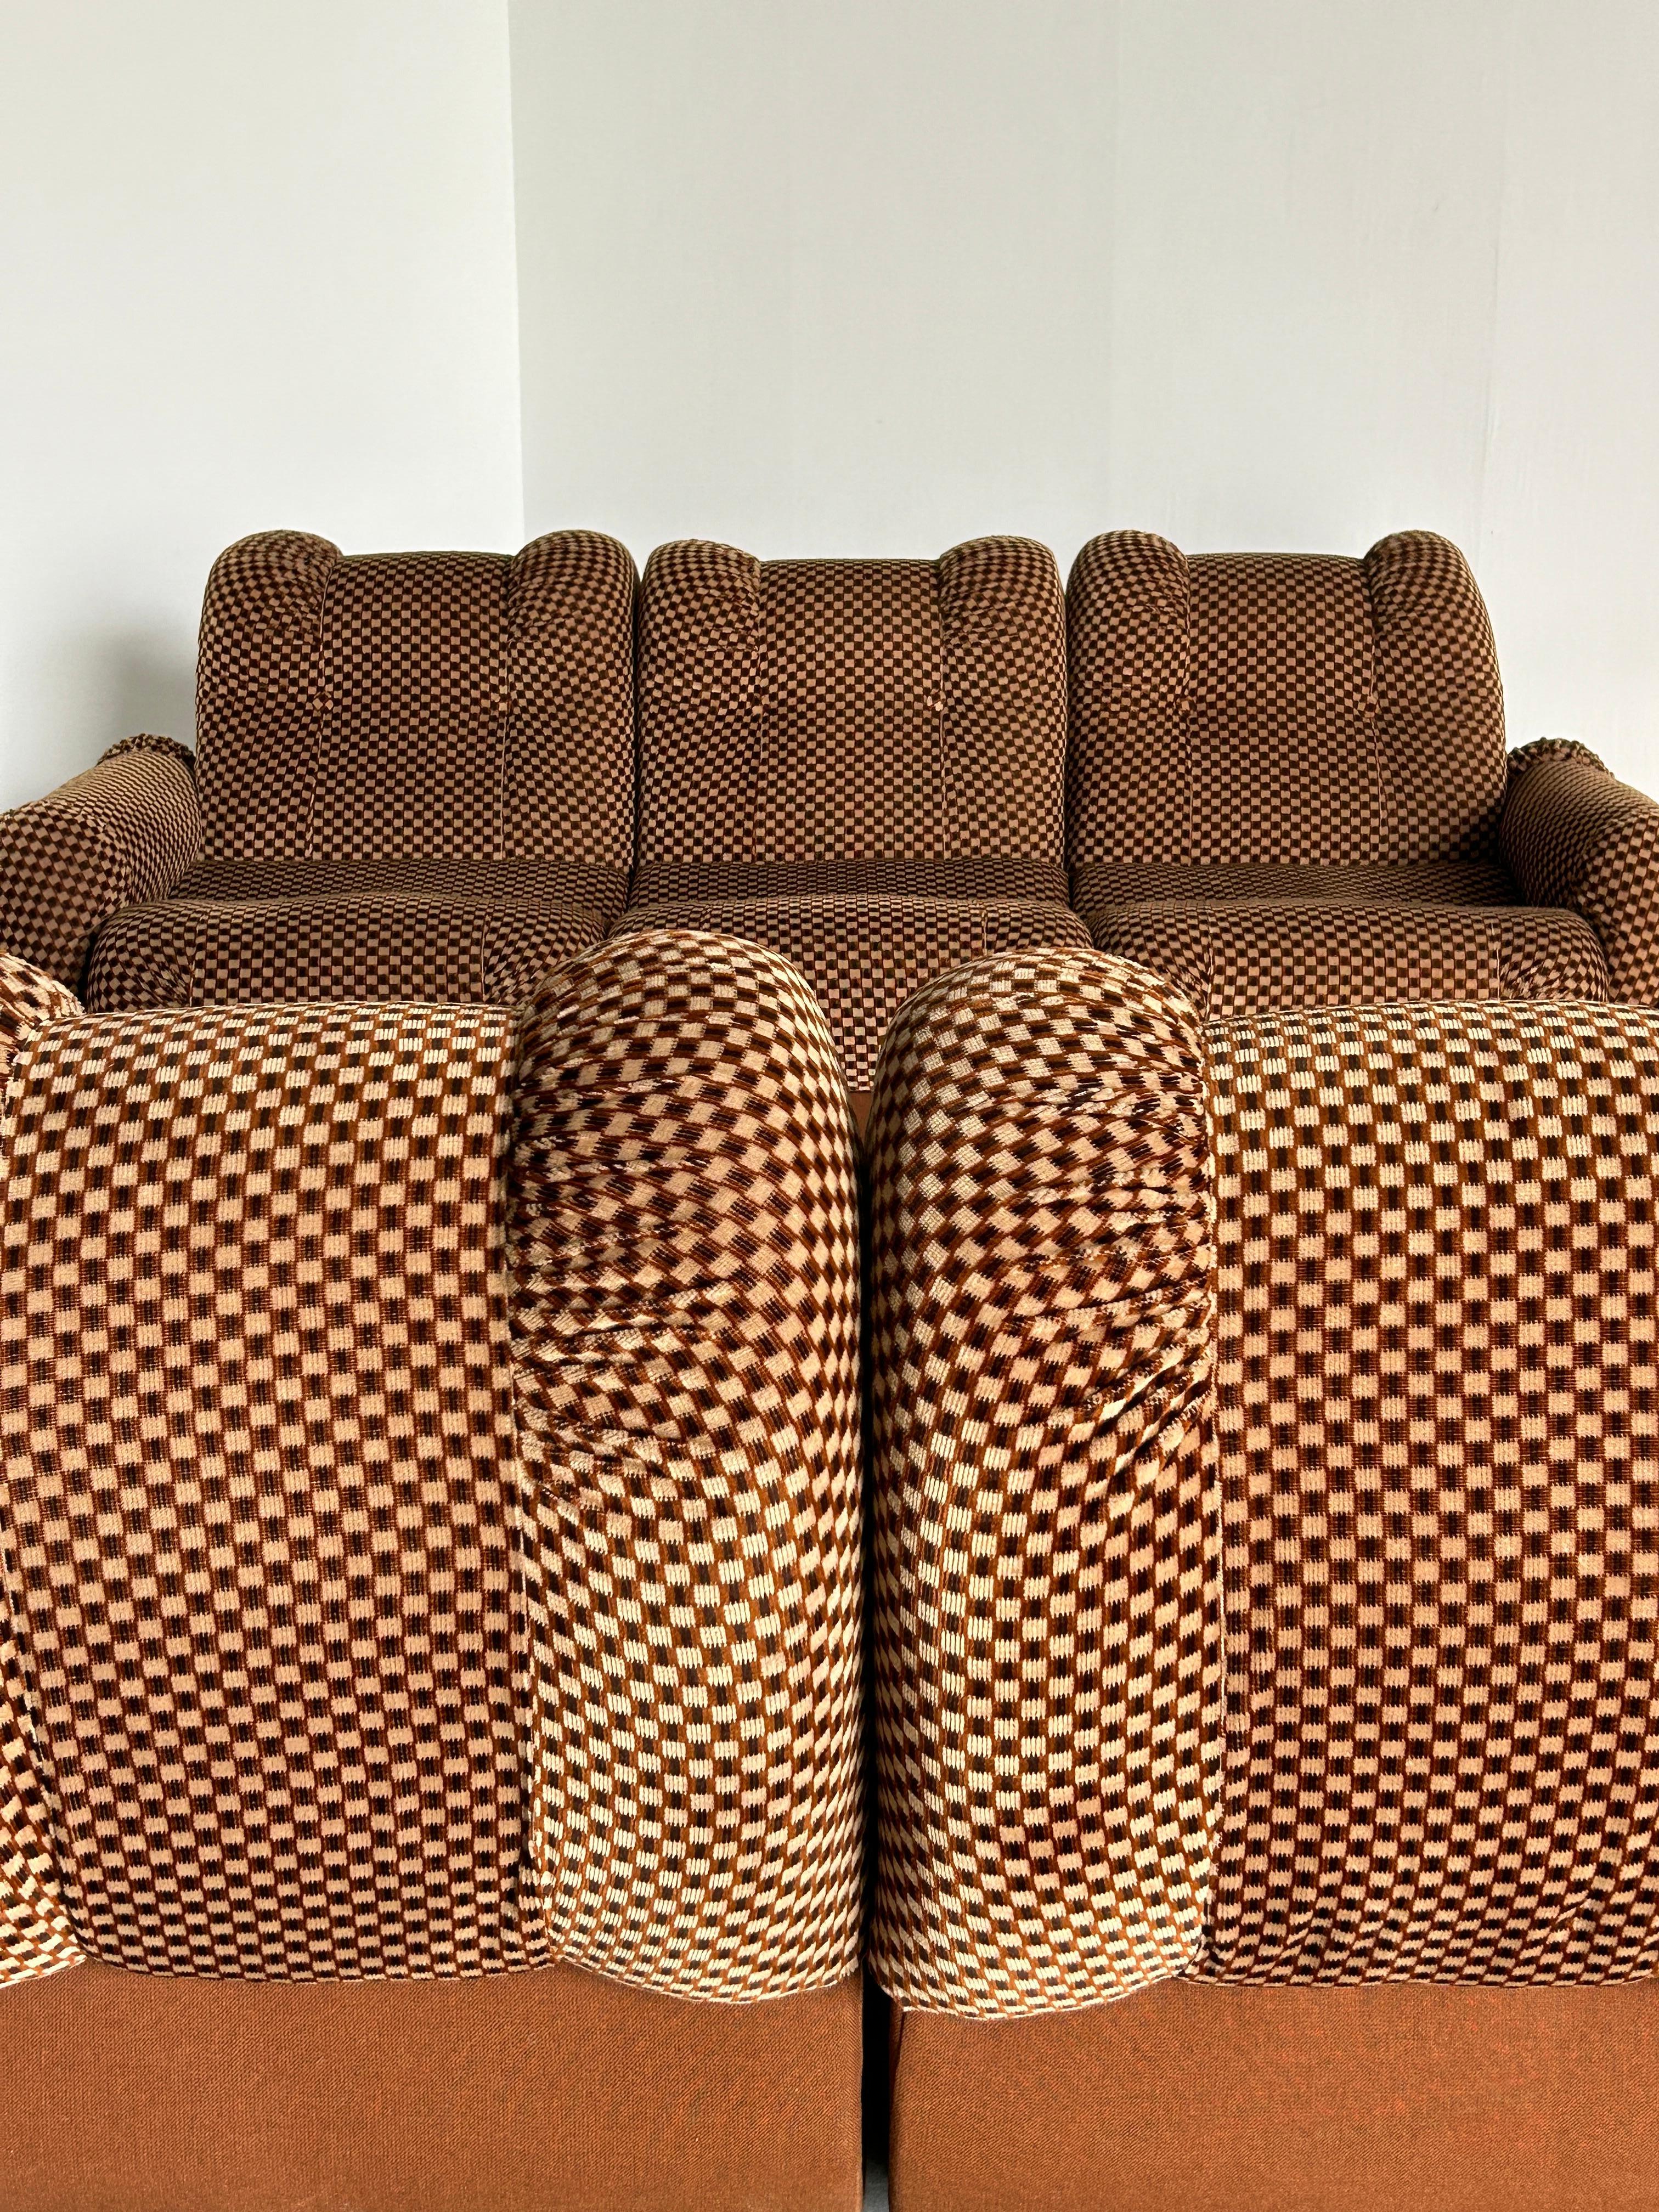 Large Space Age Cloud Modular Sofa Set in Brown Striped Fabric, Italy 1960s For Sale 4